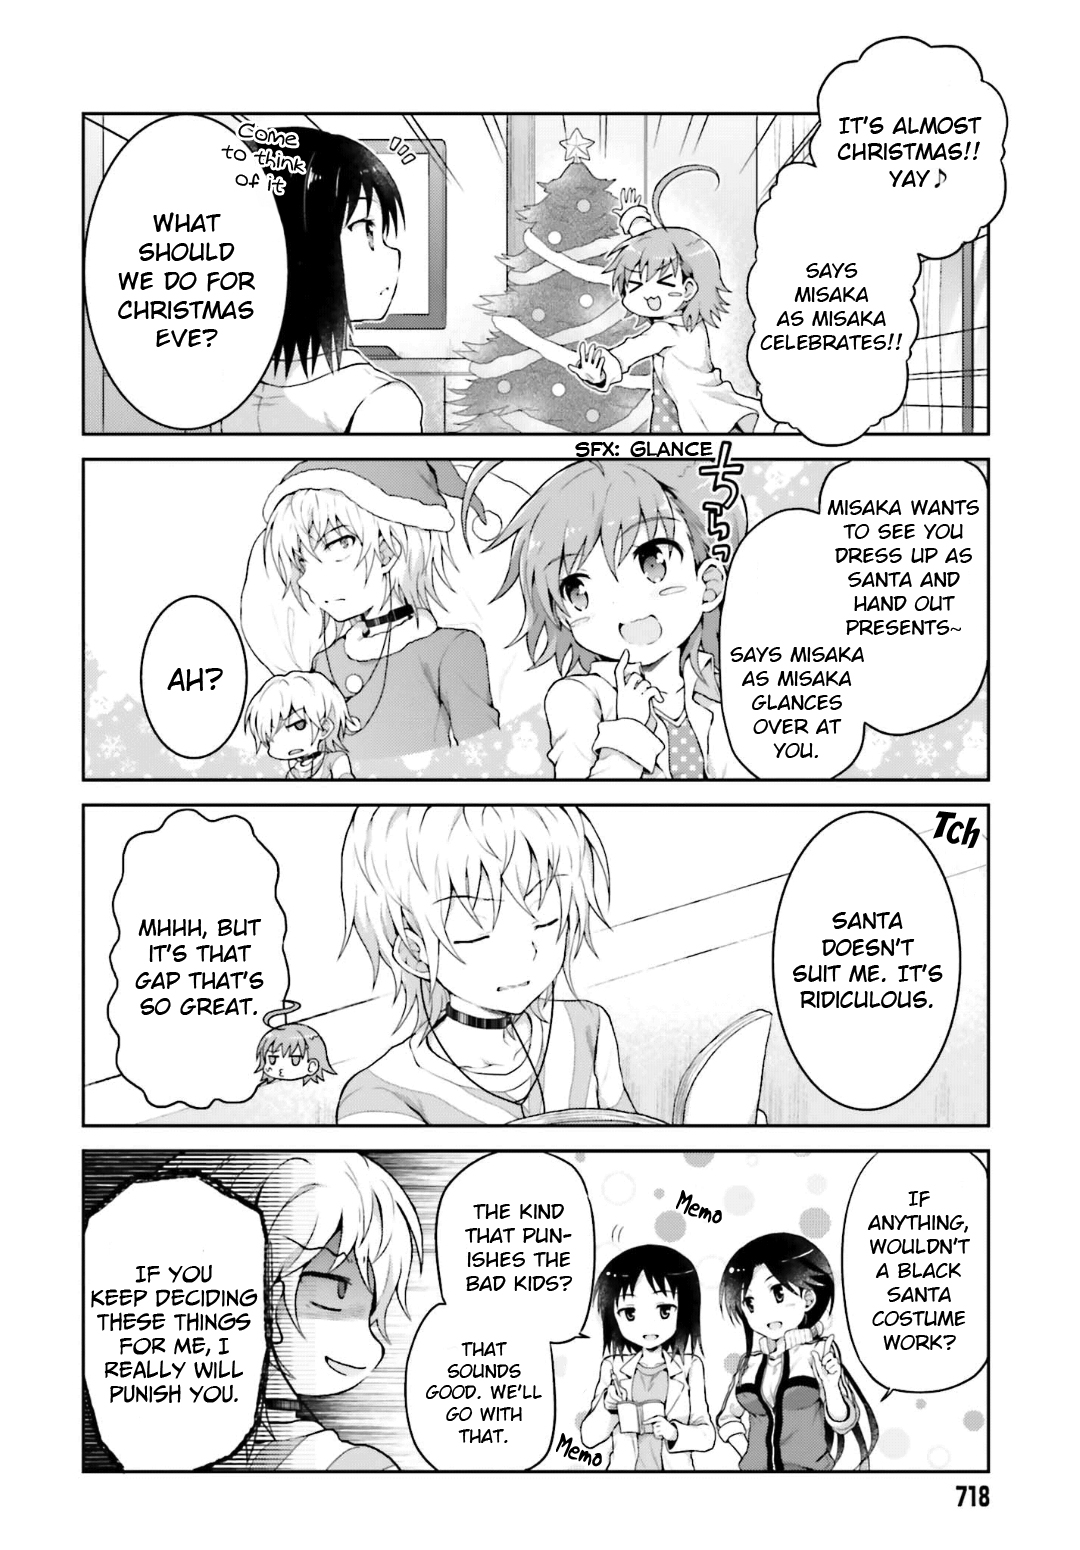 A Certain Idol Accelerator - Page 2